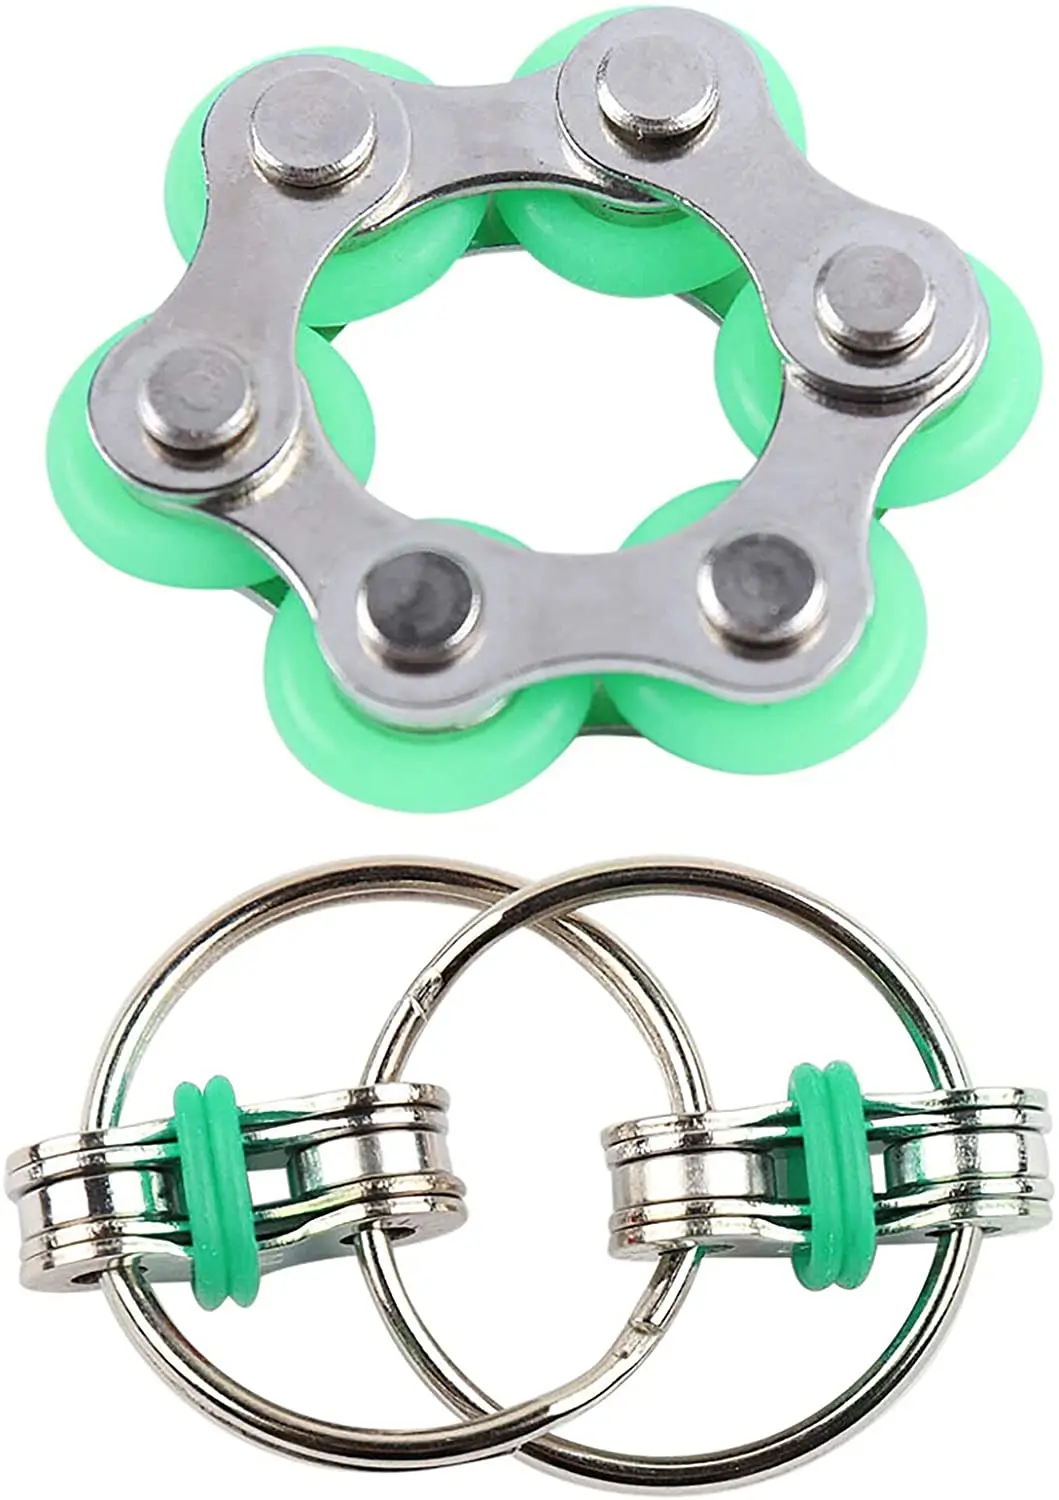 Details about   Fidget Bike Chain Ring Finger Spinner Stress ADHD Sensory Autism Relief Toy NEW 